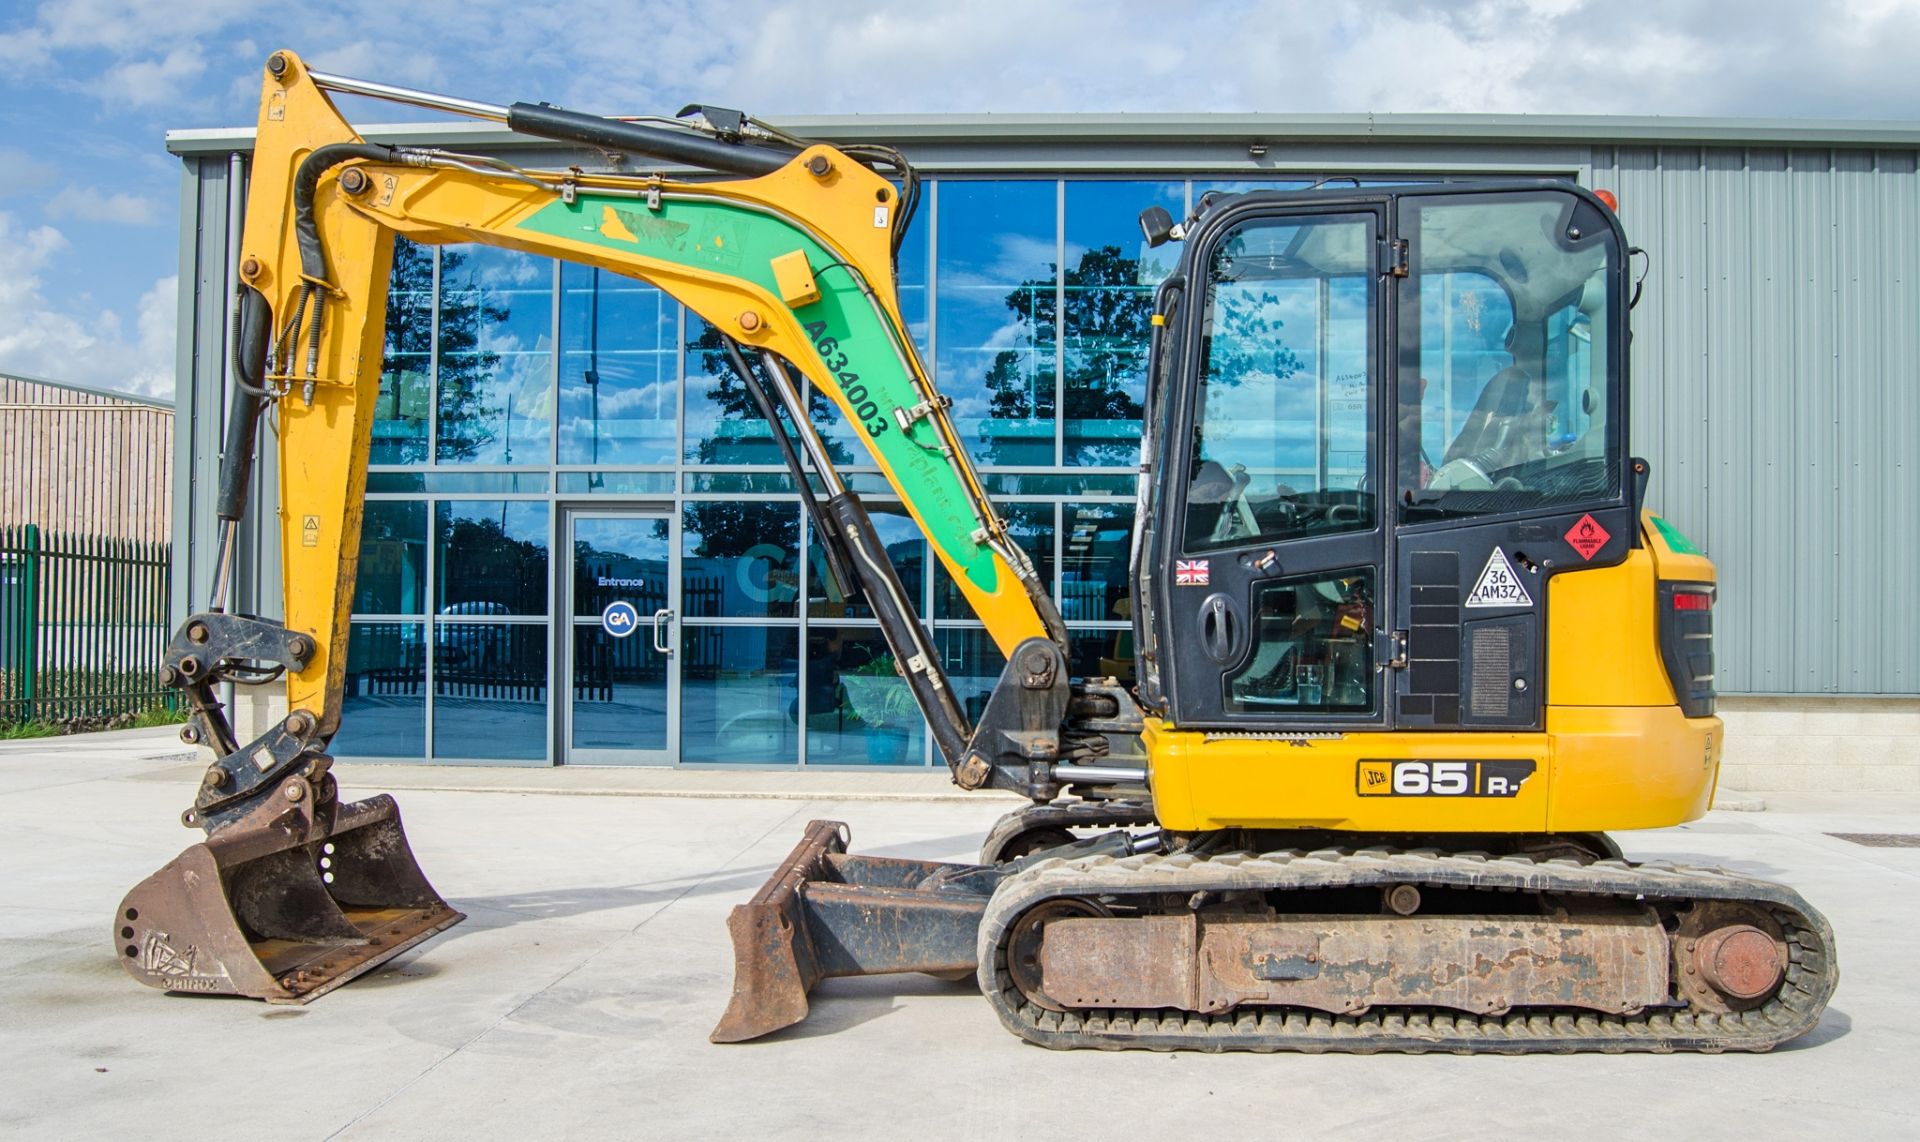 JCB 65 R-1 6.5 tonne rubber tracked excavator Year: 2015 S/N: 1914106 Recorded Hours: 176 (Suspect - Image 7 of 26